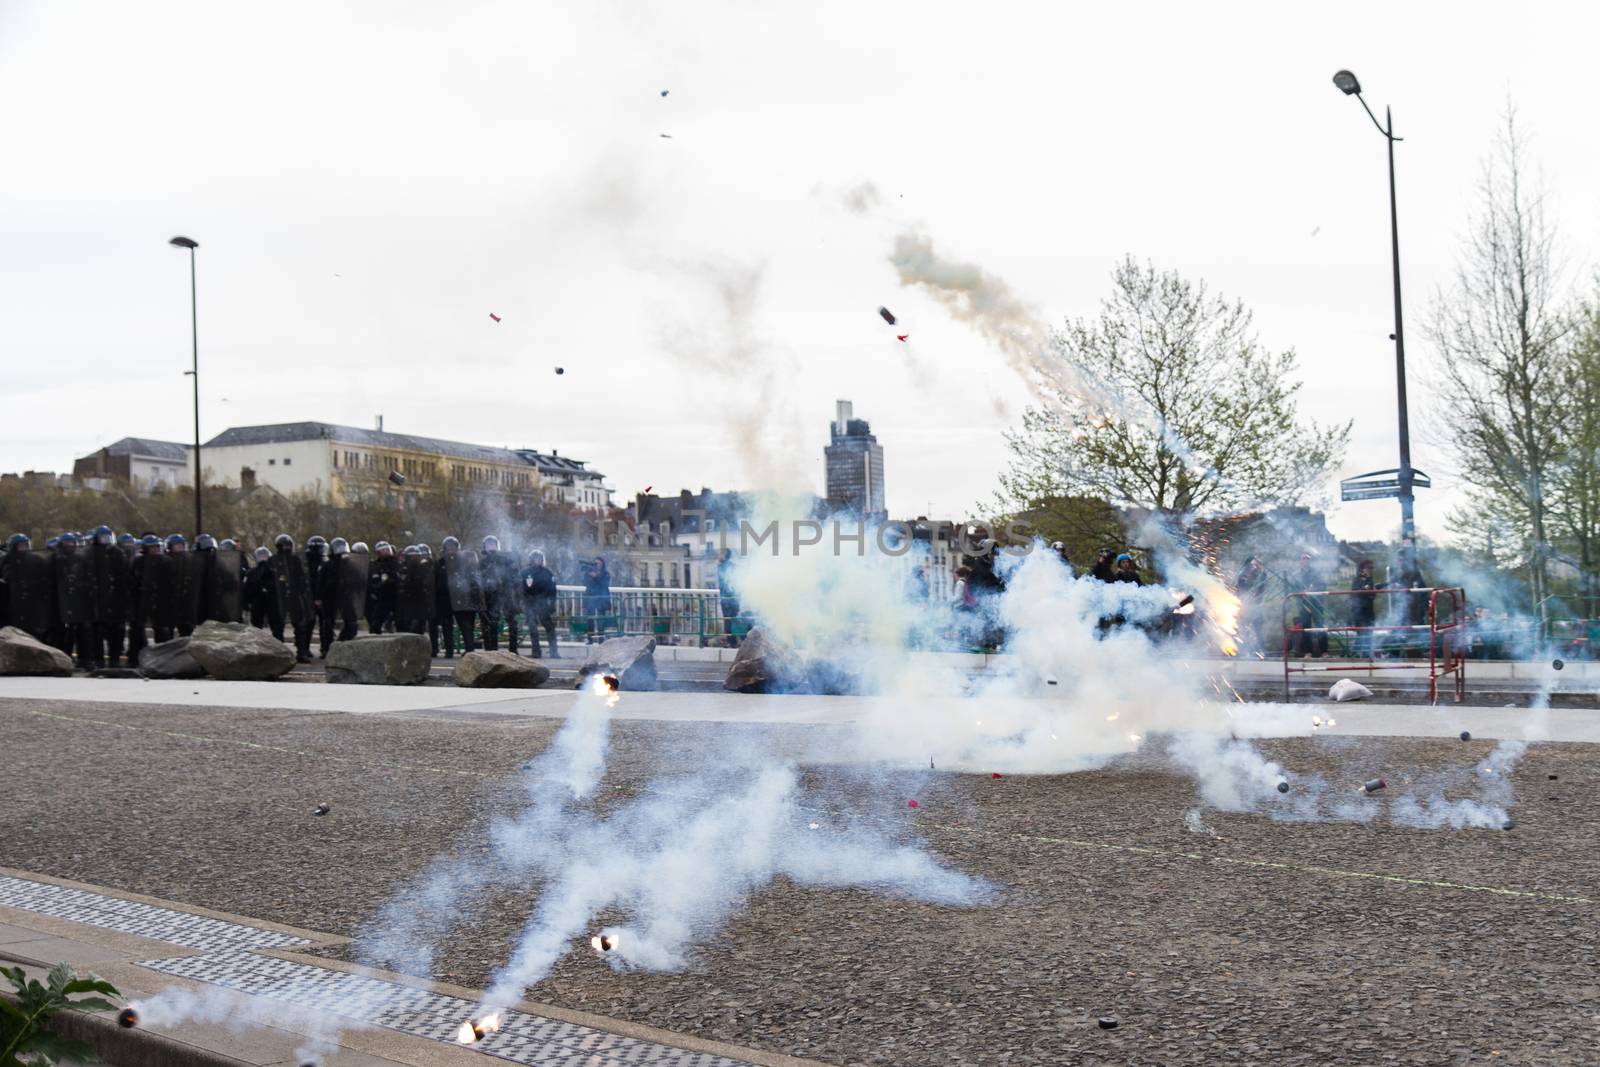 FRANCE, Nantes : Protesters face riot police on April 20, 2016 in Nantes, western France, as they protest against the government's planned labour law reforms.High school pupils and workers protest against deeply unpopular labour reforms that have divided the Socialist government and raised hackles in a country accustomed to iron-clad job security.